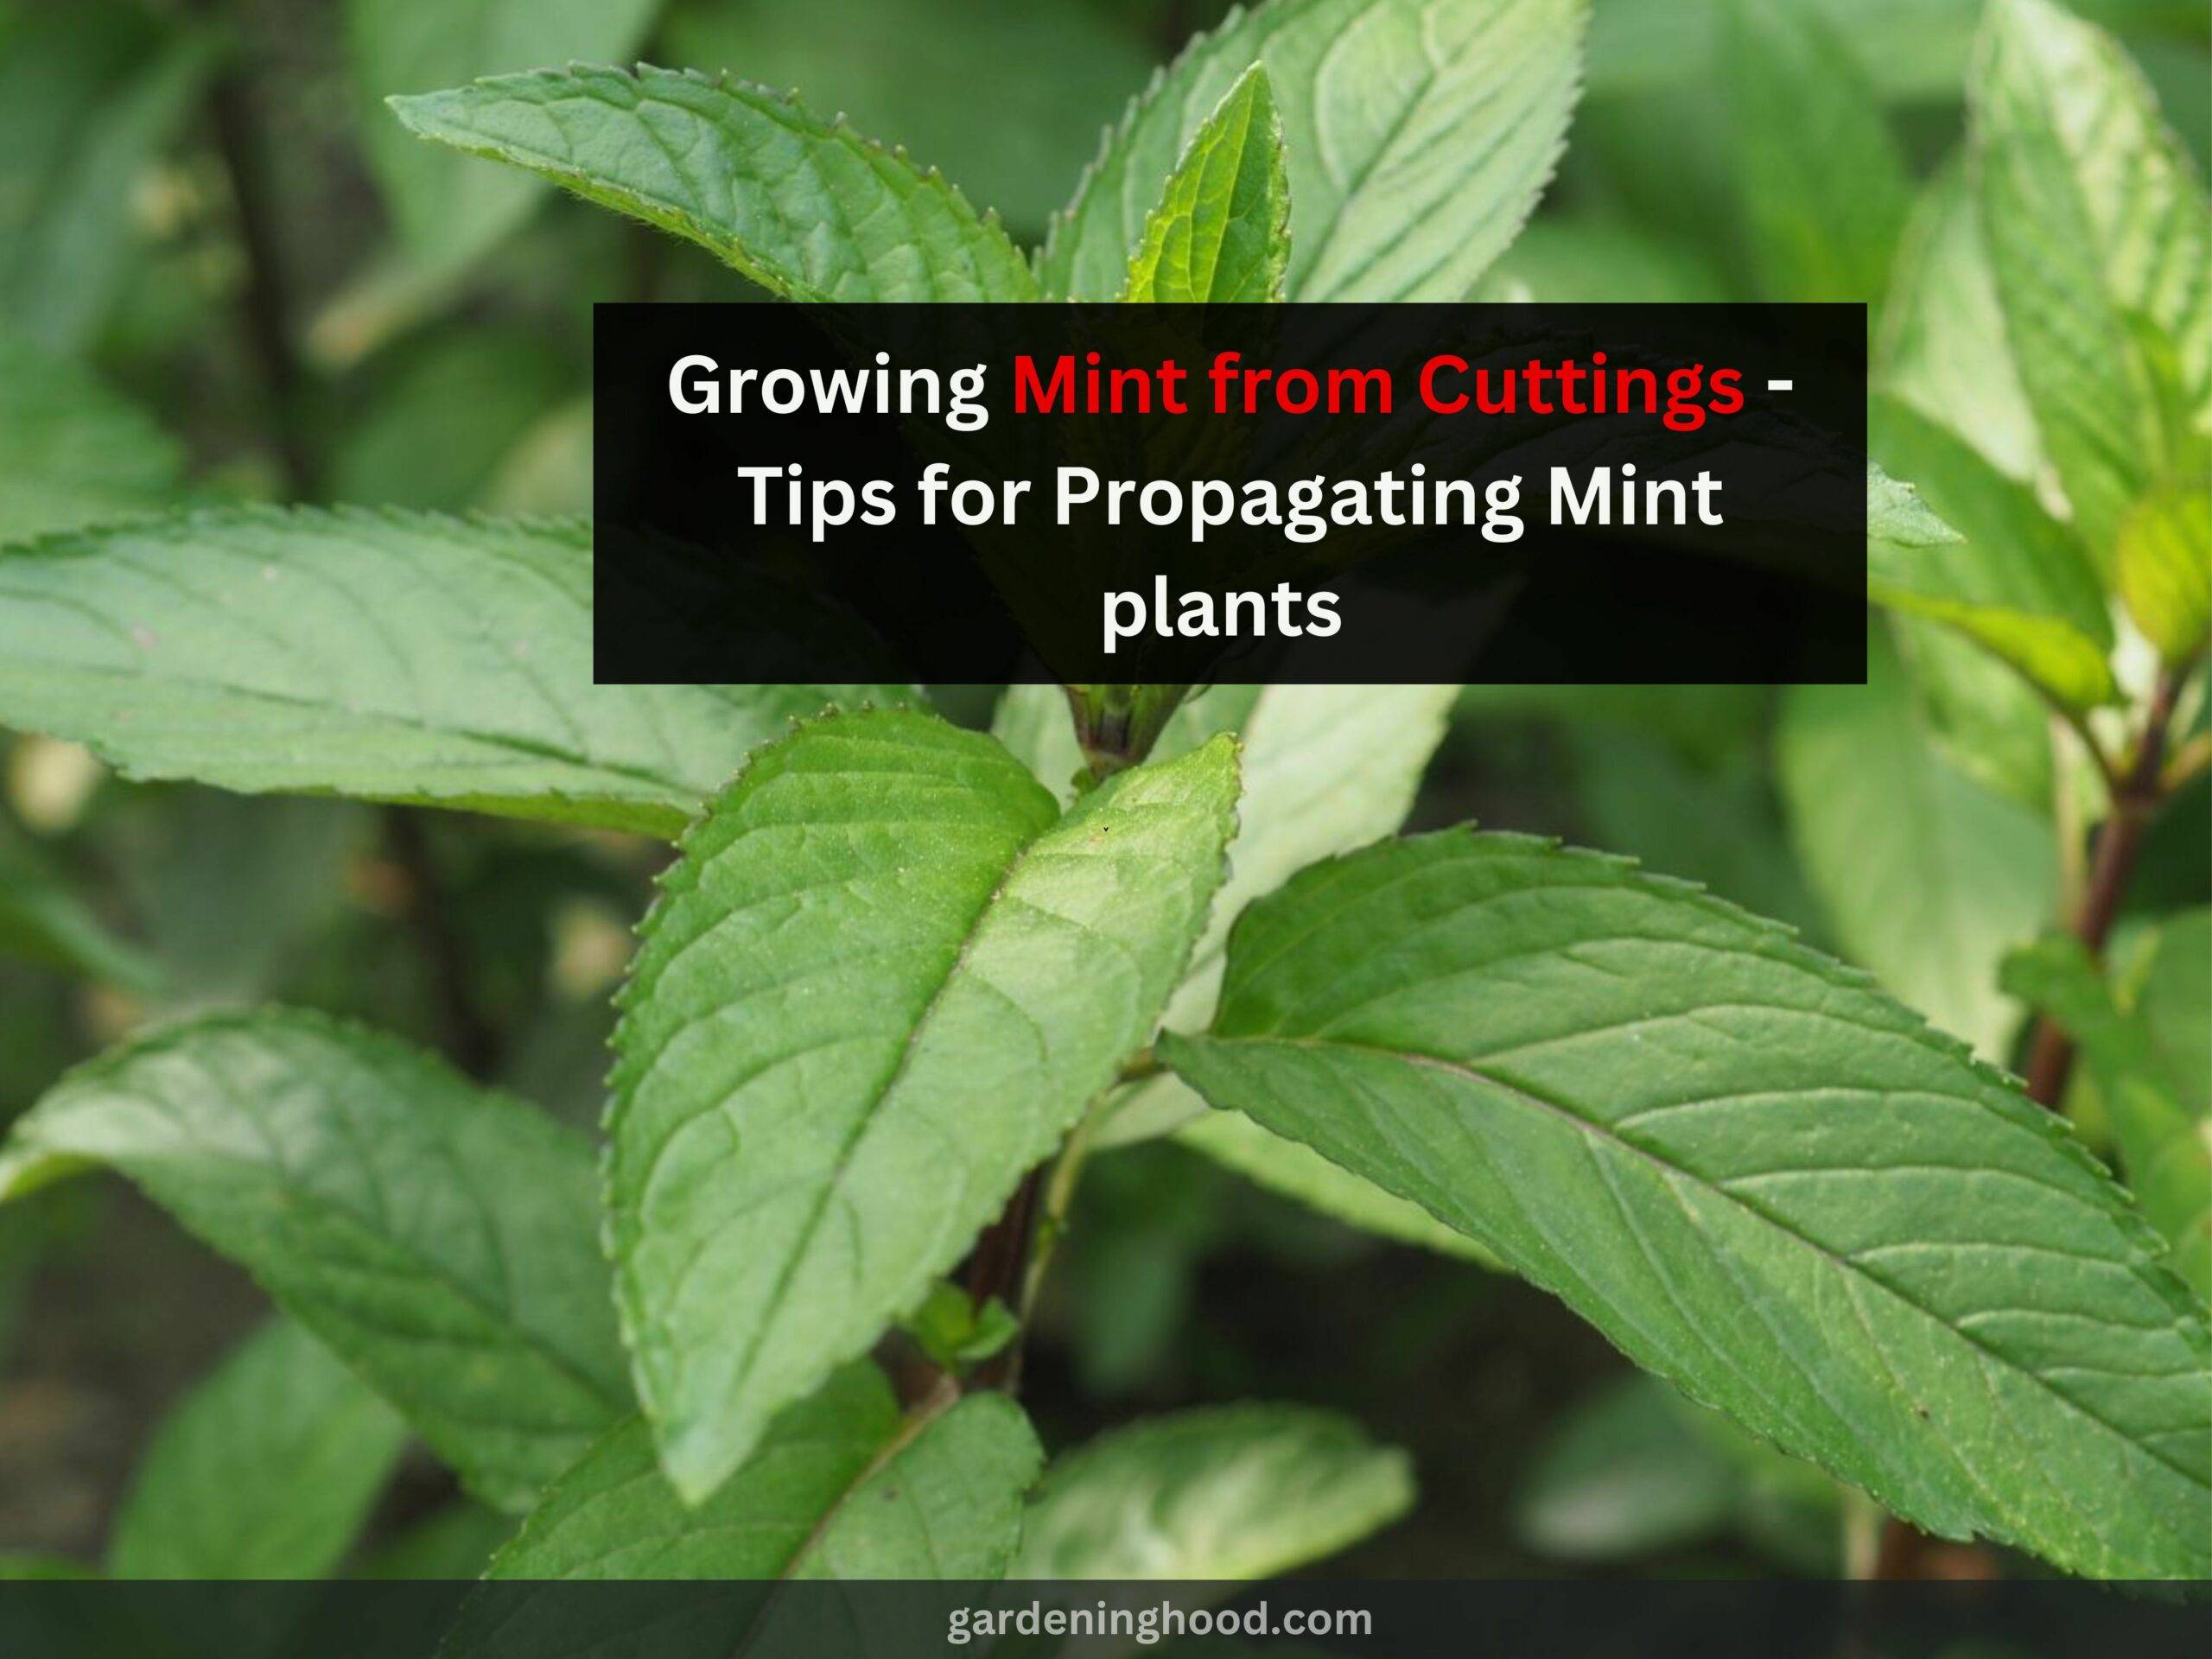 Growing Mint from Cuttings - Tips for Propagating Mint plants 